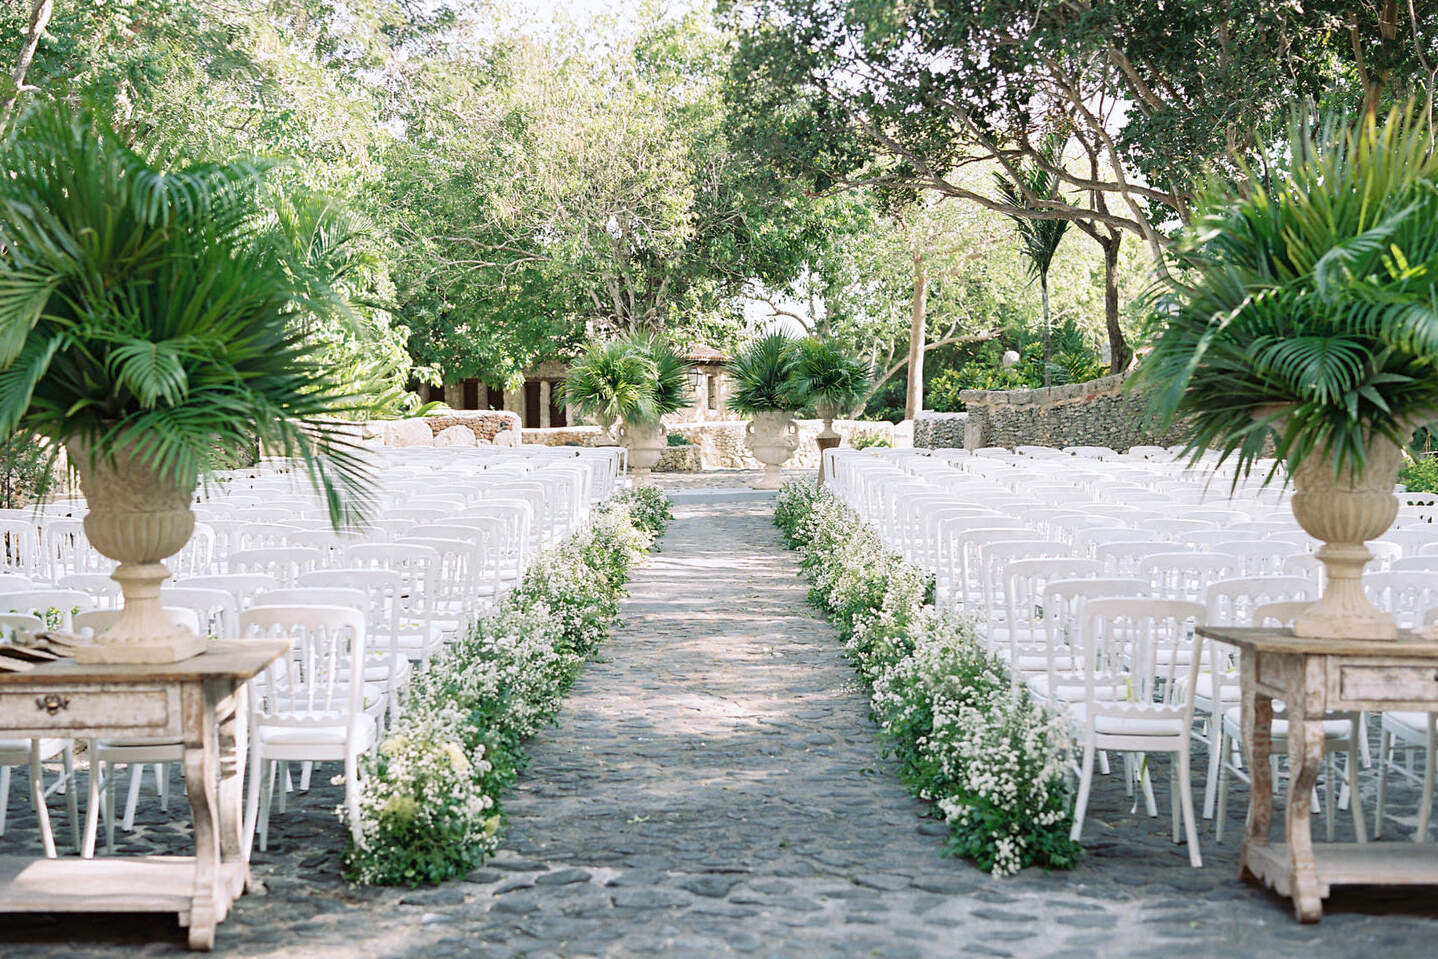 A destination wedding ceremony at a resort in the Dominican Republic, set on a stone courtyard with classic white chairs and white flowers and greenery lining the aisle.